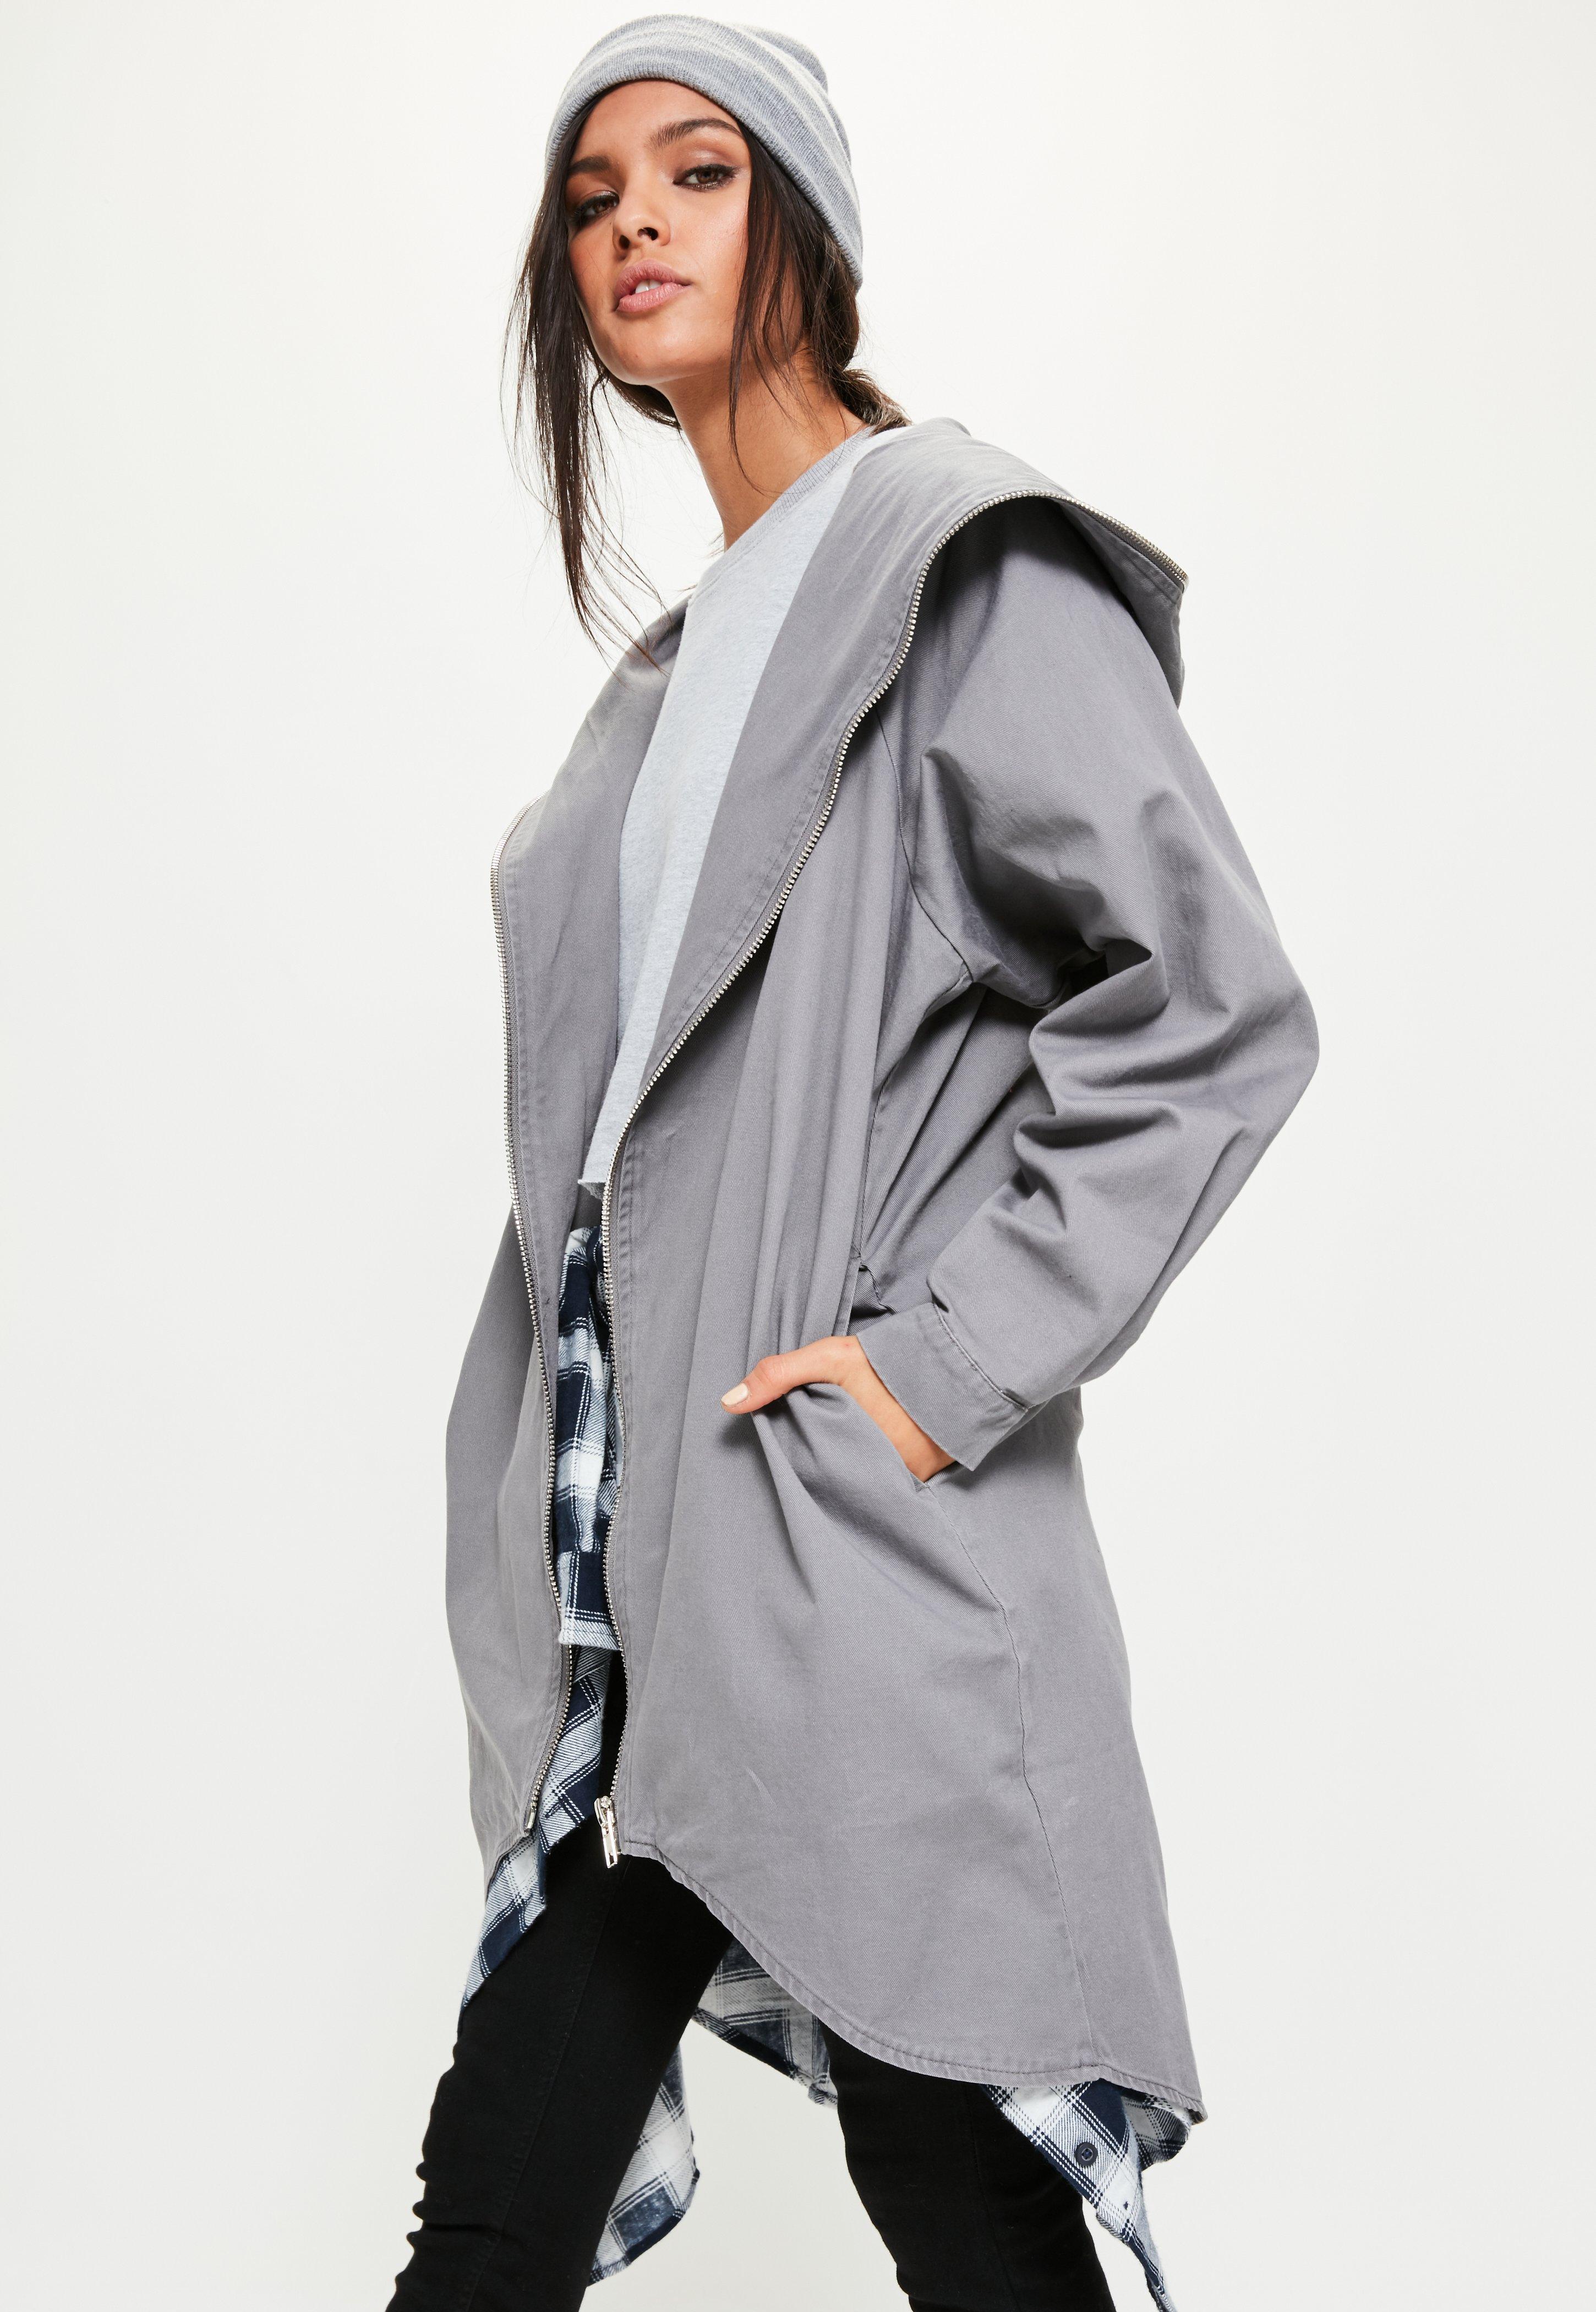 Lyst - Missguided Grey Vintage Wash Oversized Hooded Parka in Gray